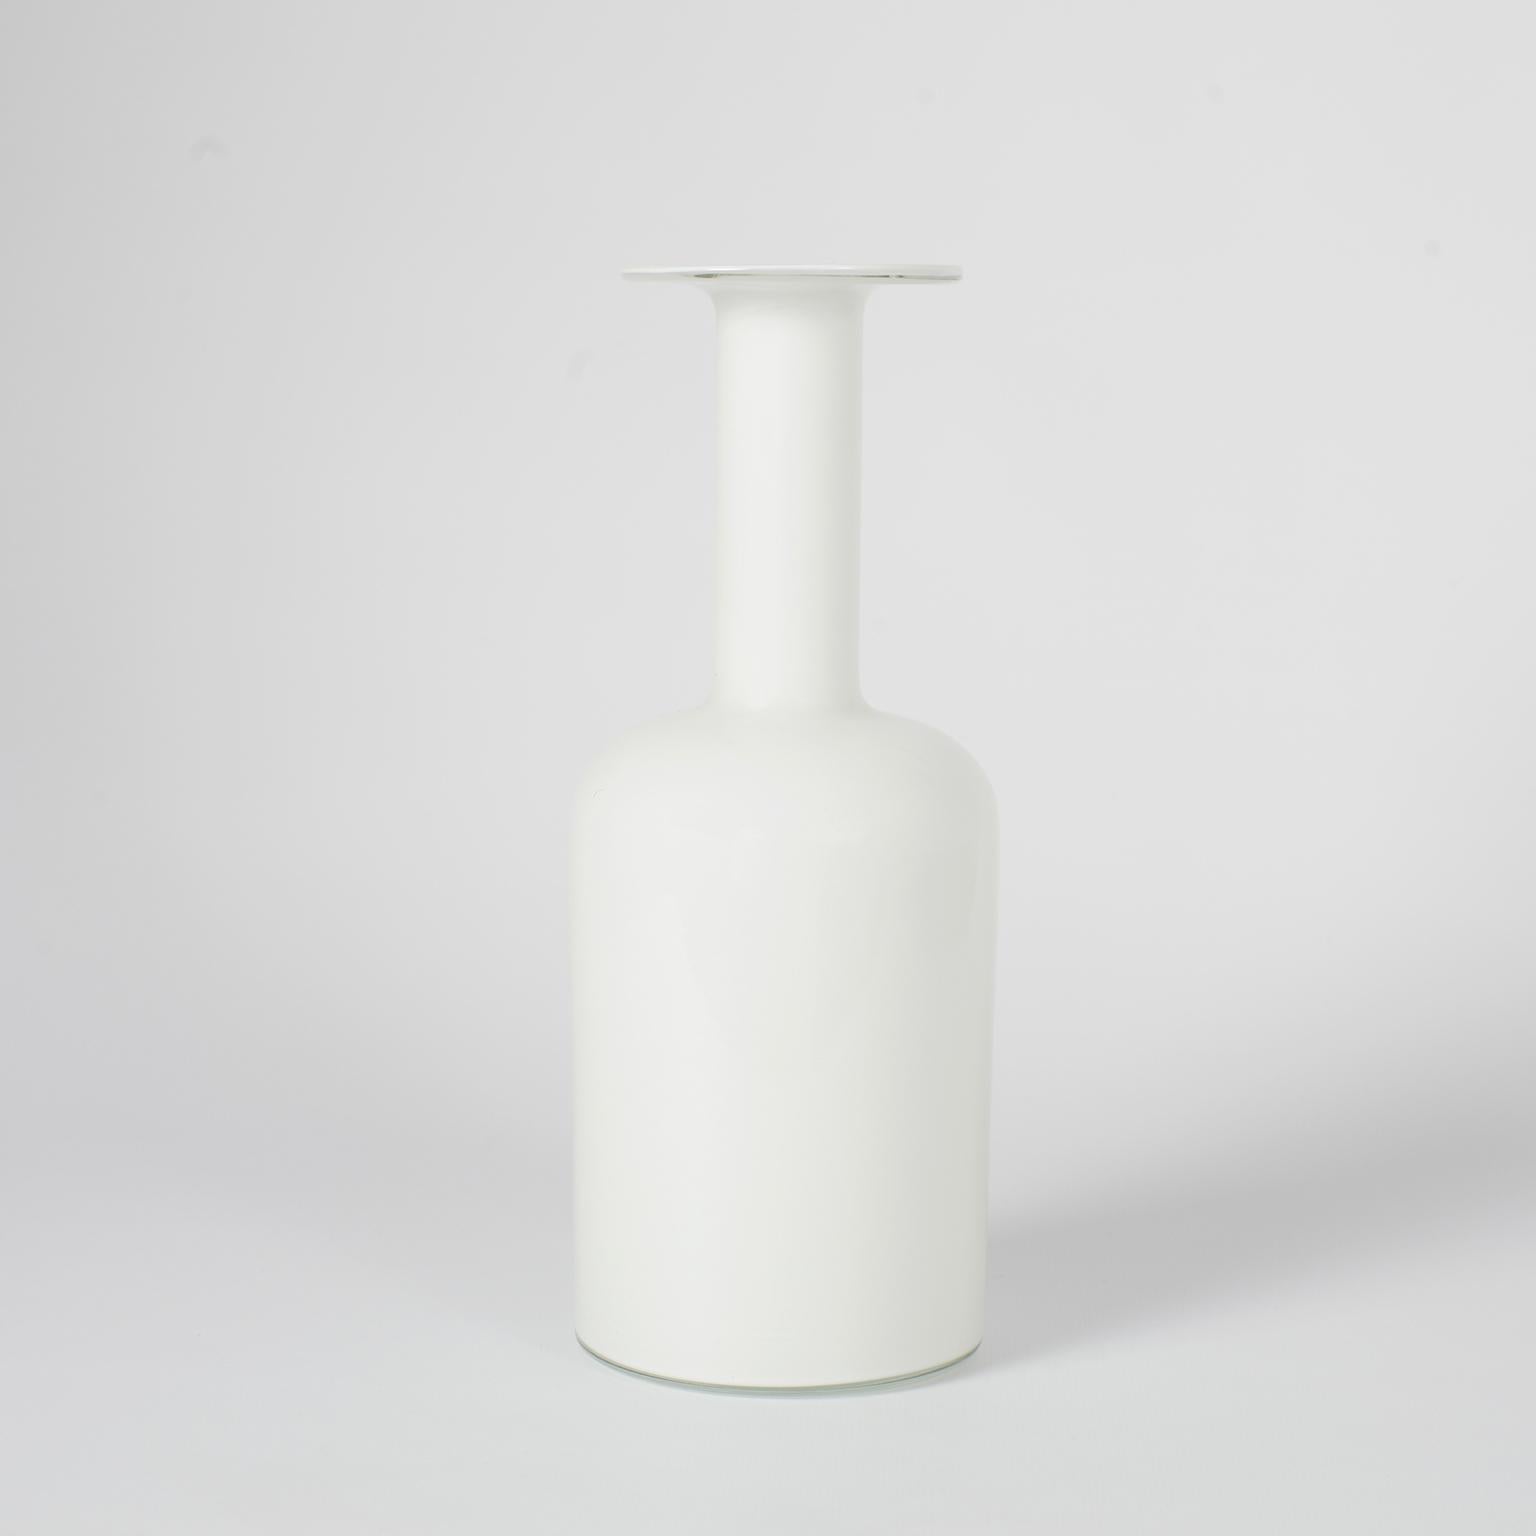 Scandinavian modern white colored glass vases,
Designed by Otto Brauer for Holmegaard Denmark, 1960s.
Measure: height 24.5 cm